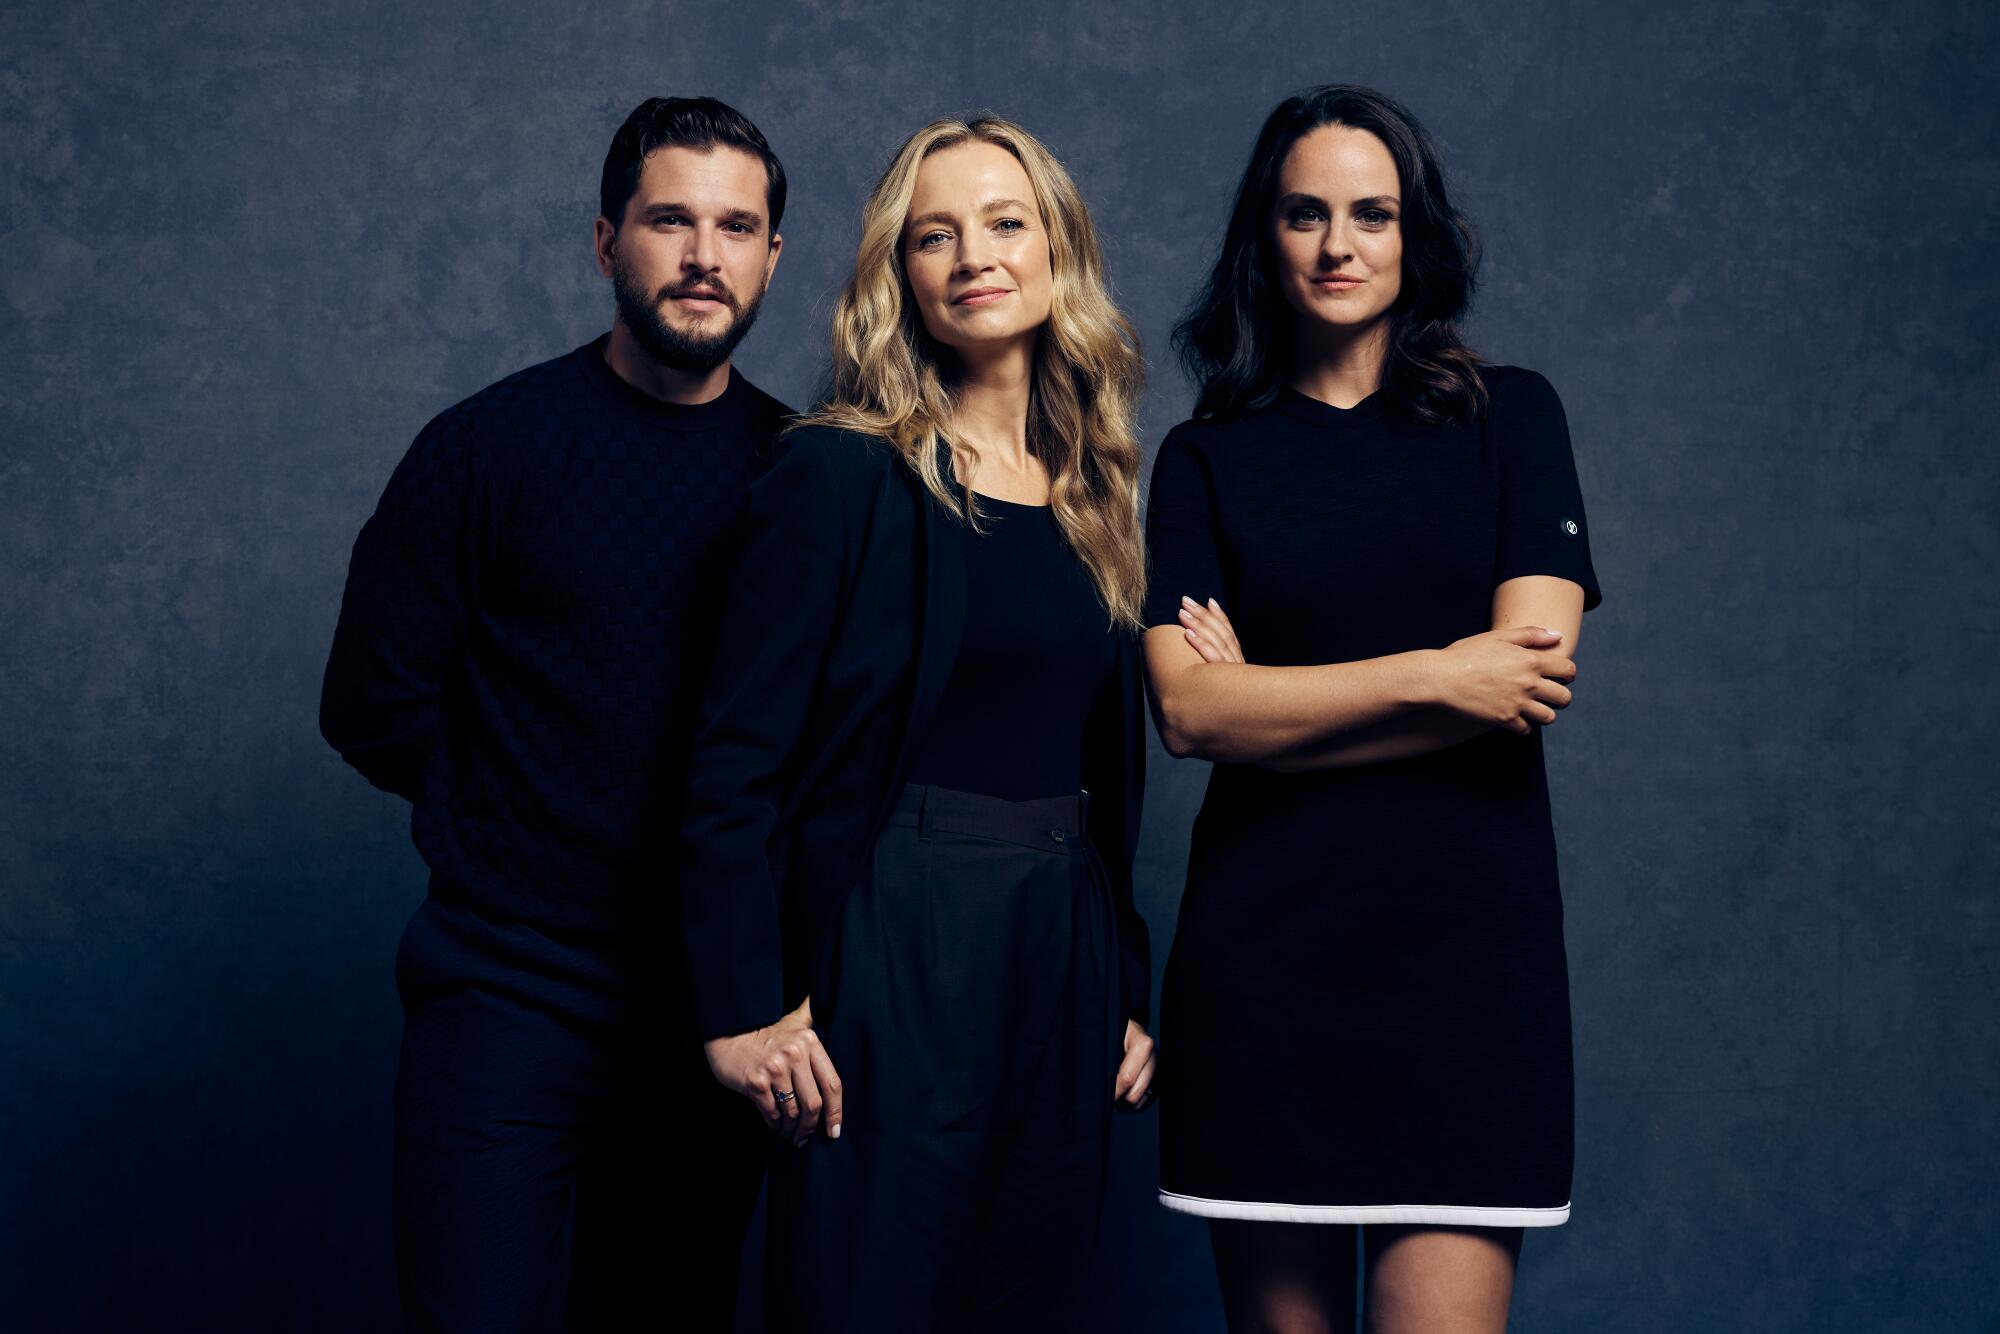 Kit Harington, director Bess Wohl and Noemie Merlant stand in dark clothes.